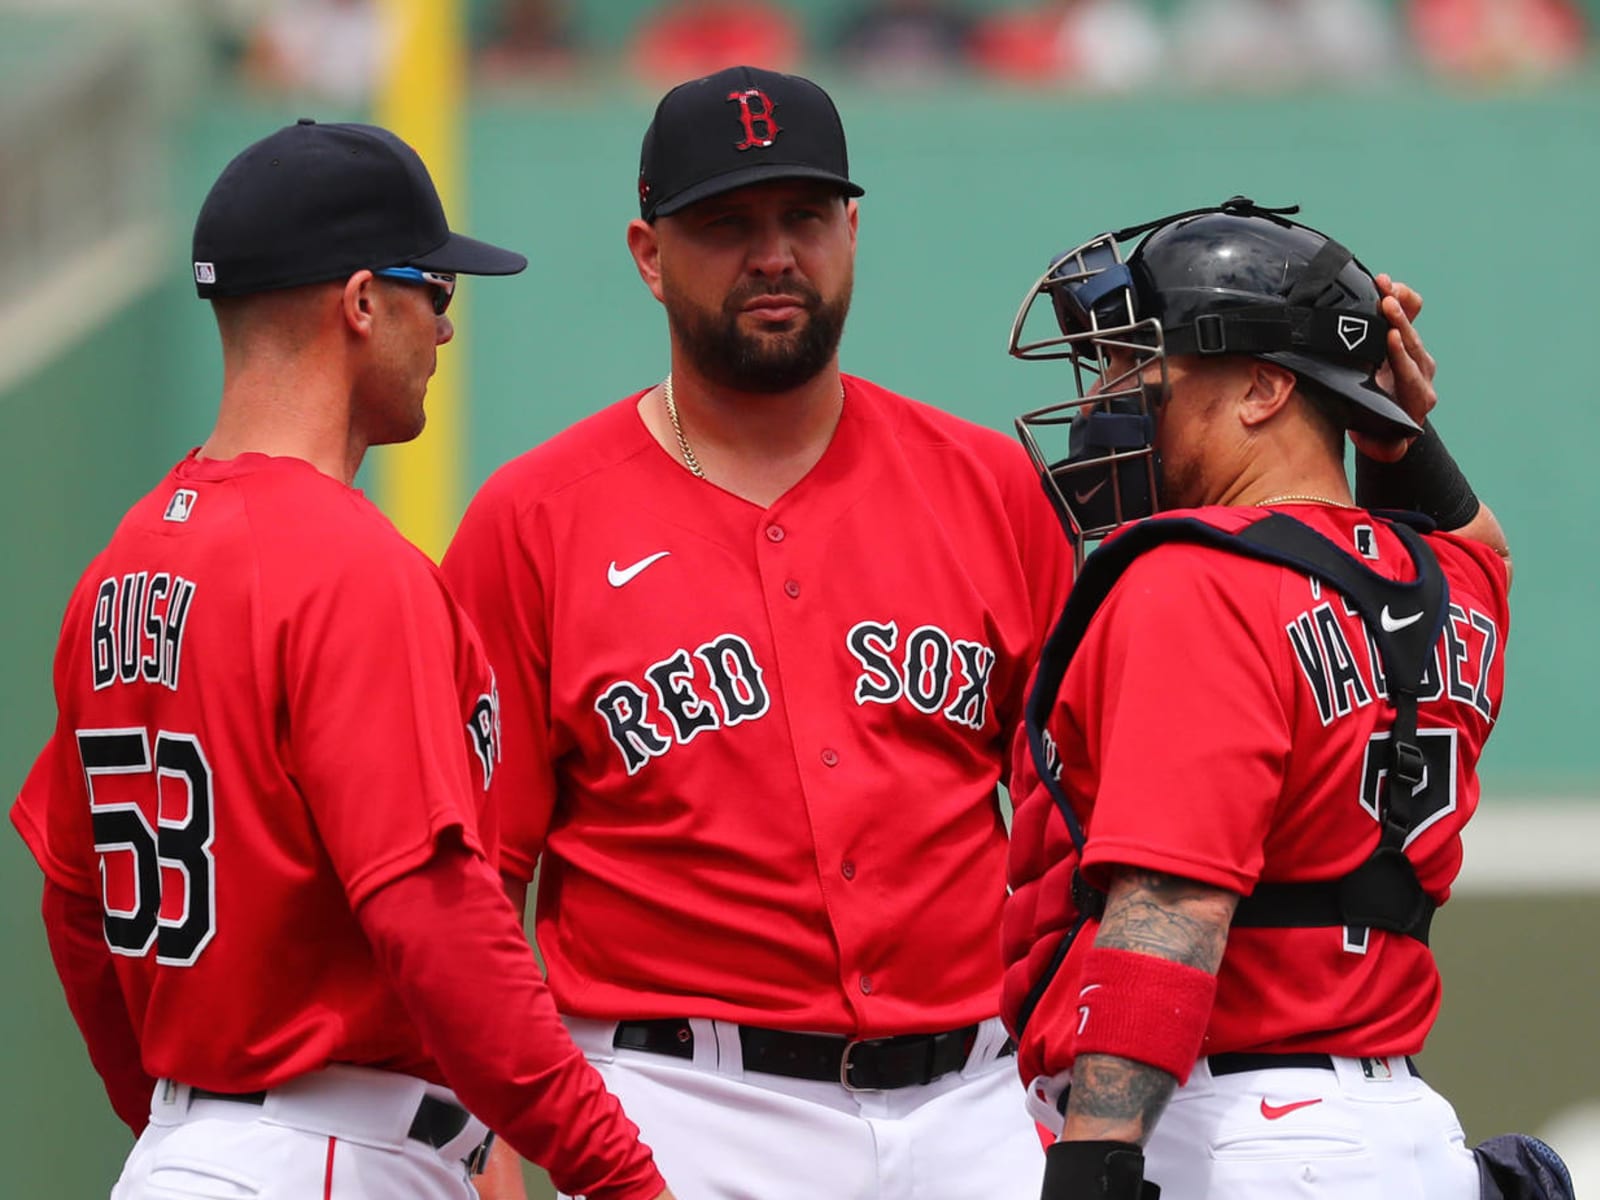 Red Sox eyeing 'new and different concepts' for uniforms